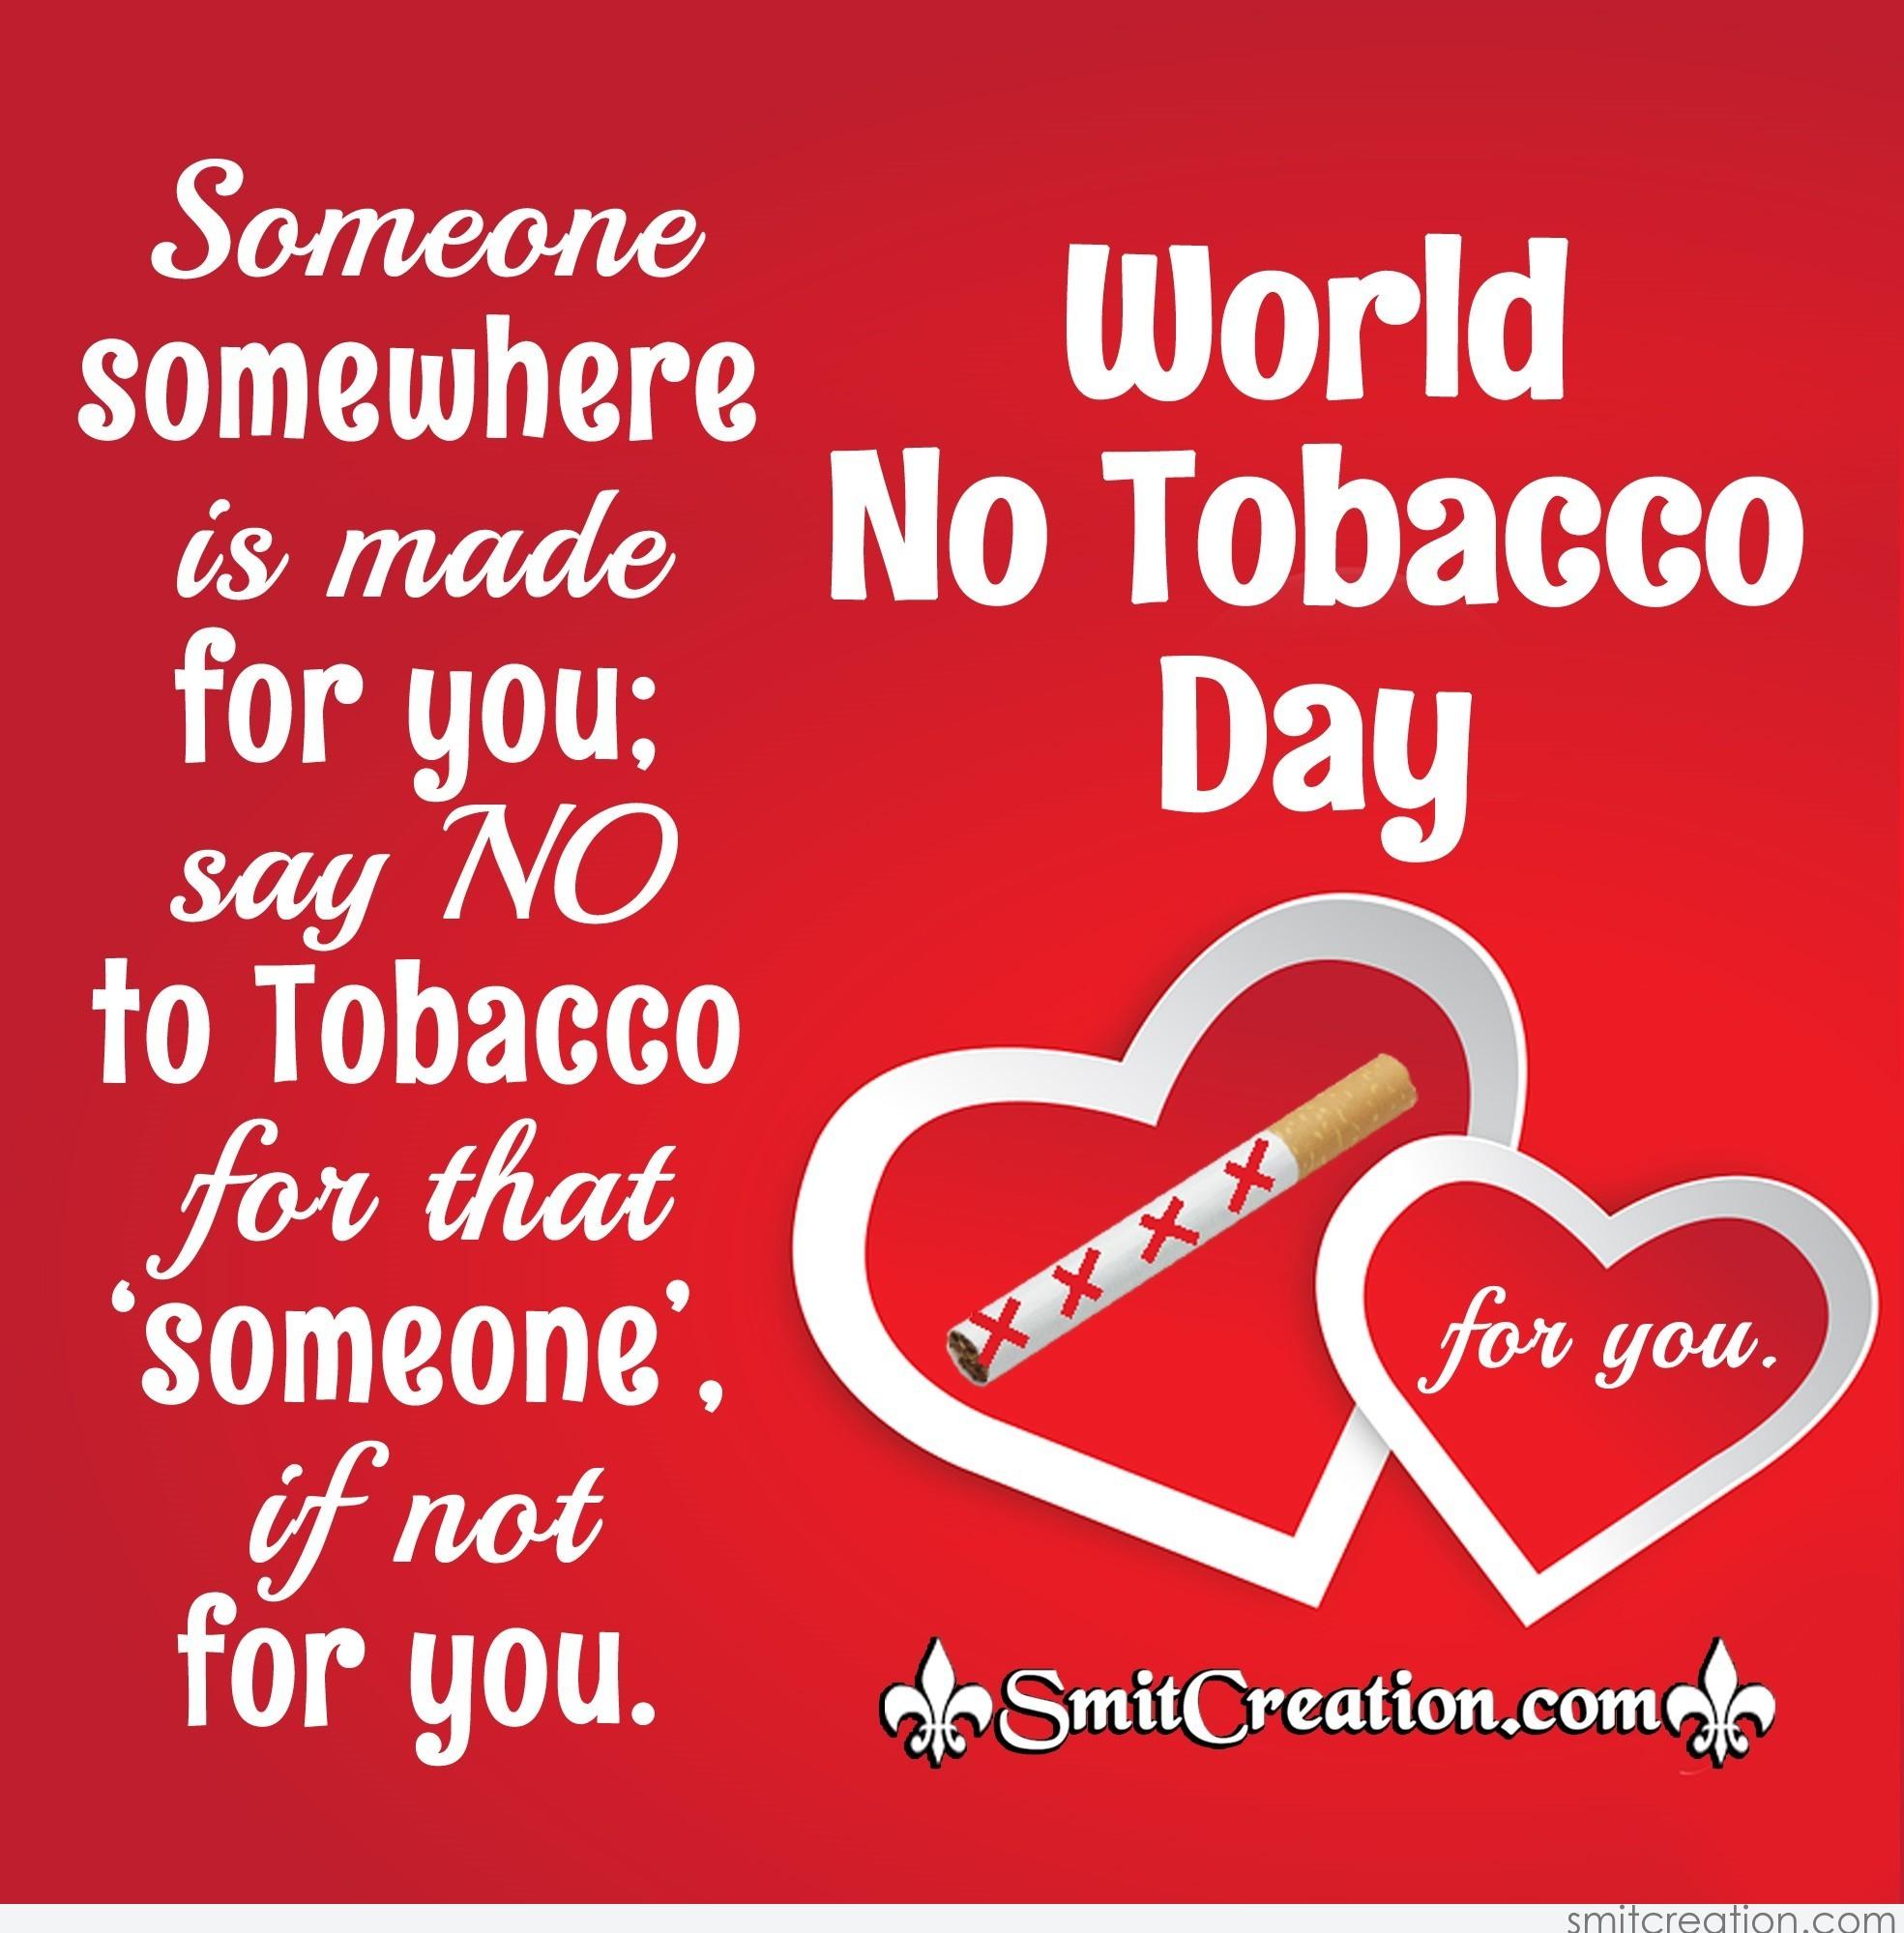 someone somewhere is made for you say no to tobacco for that someone if not for you. world no tobacco day